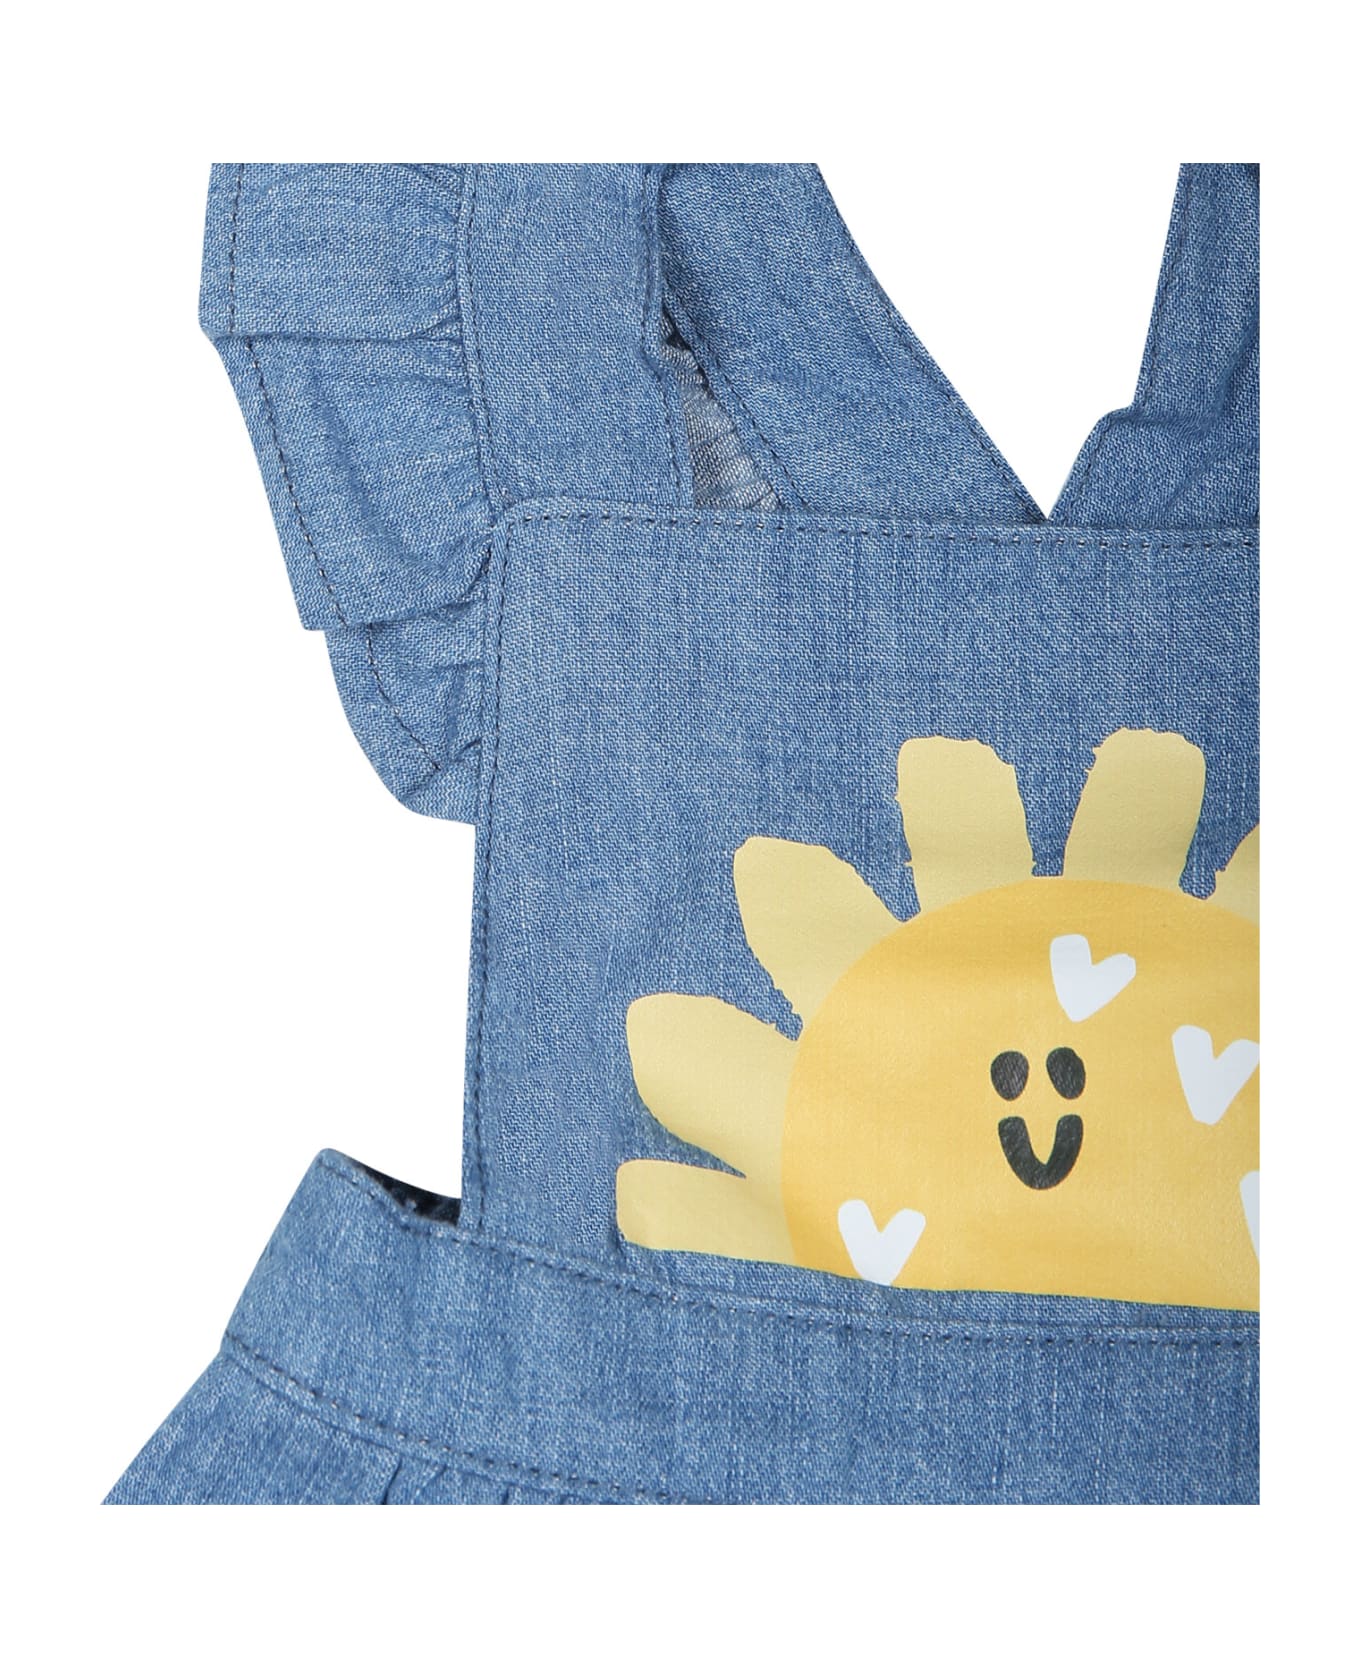 Stella McCartney Kids Blue Overalls For Baby Girl With Bees - Celeste/multicolor